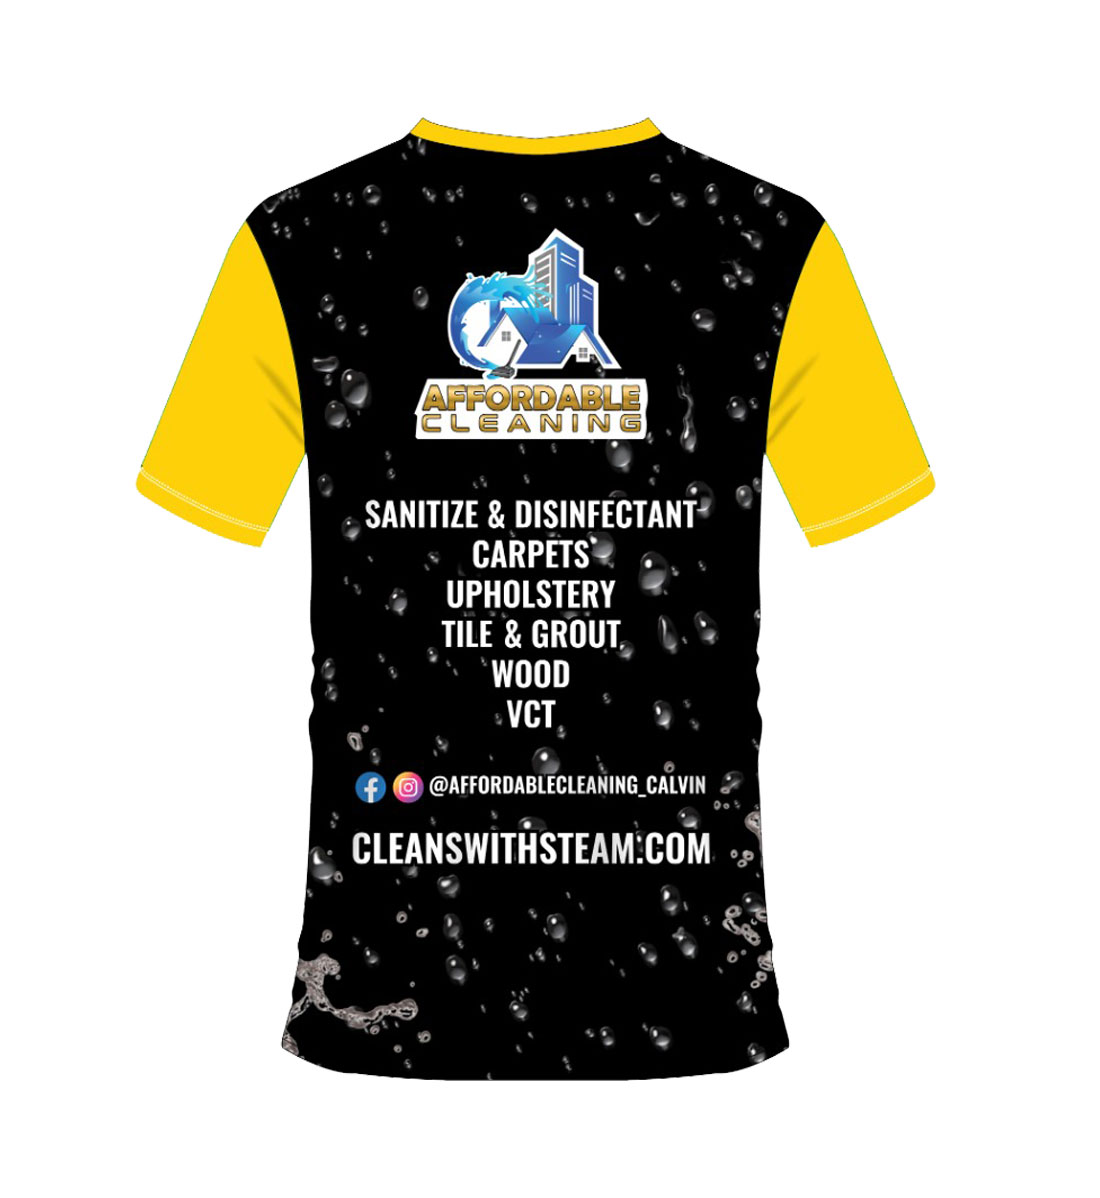 Dye Sublimation Shirt Designs and Printing